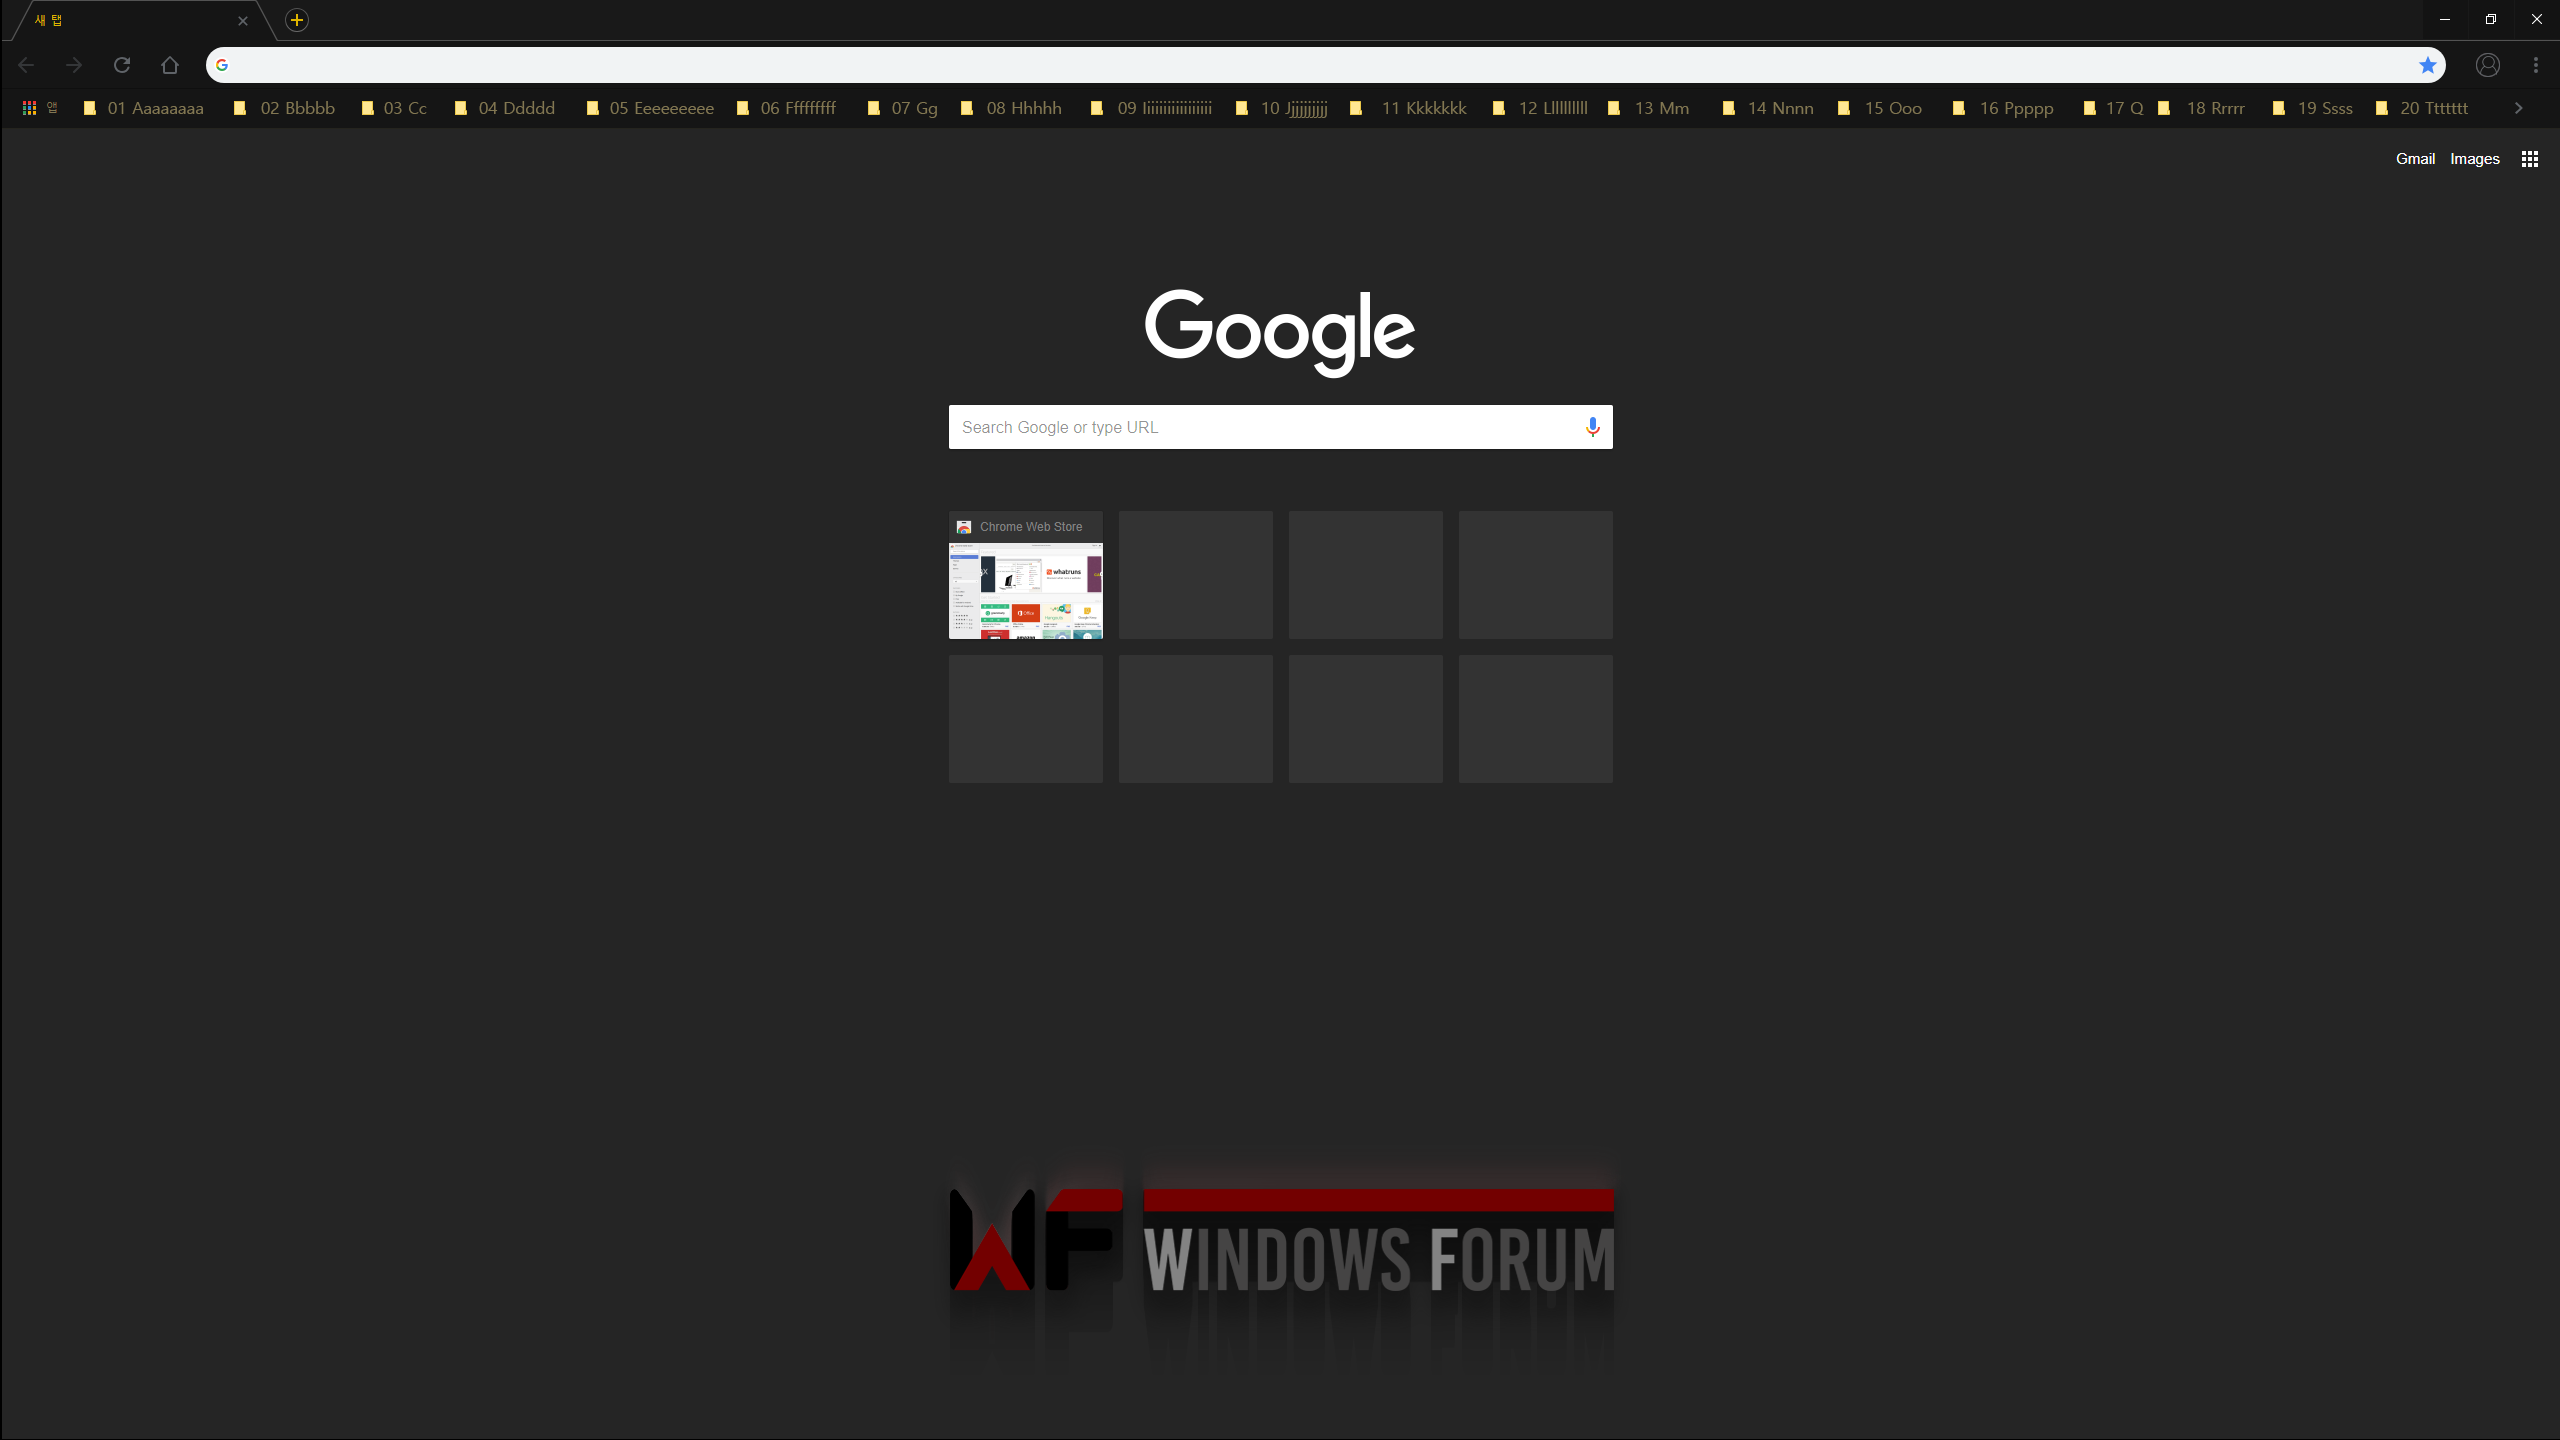 Chrome Themes Preview_2018 08 07.png